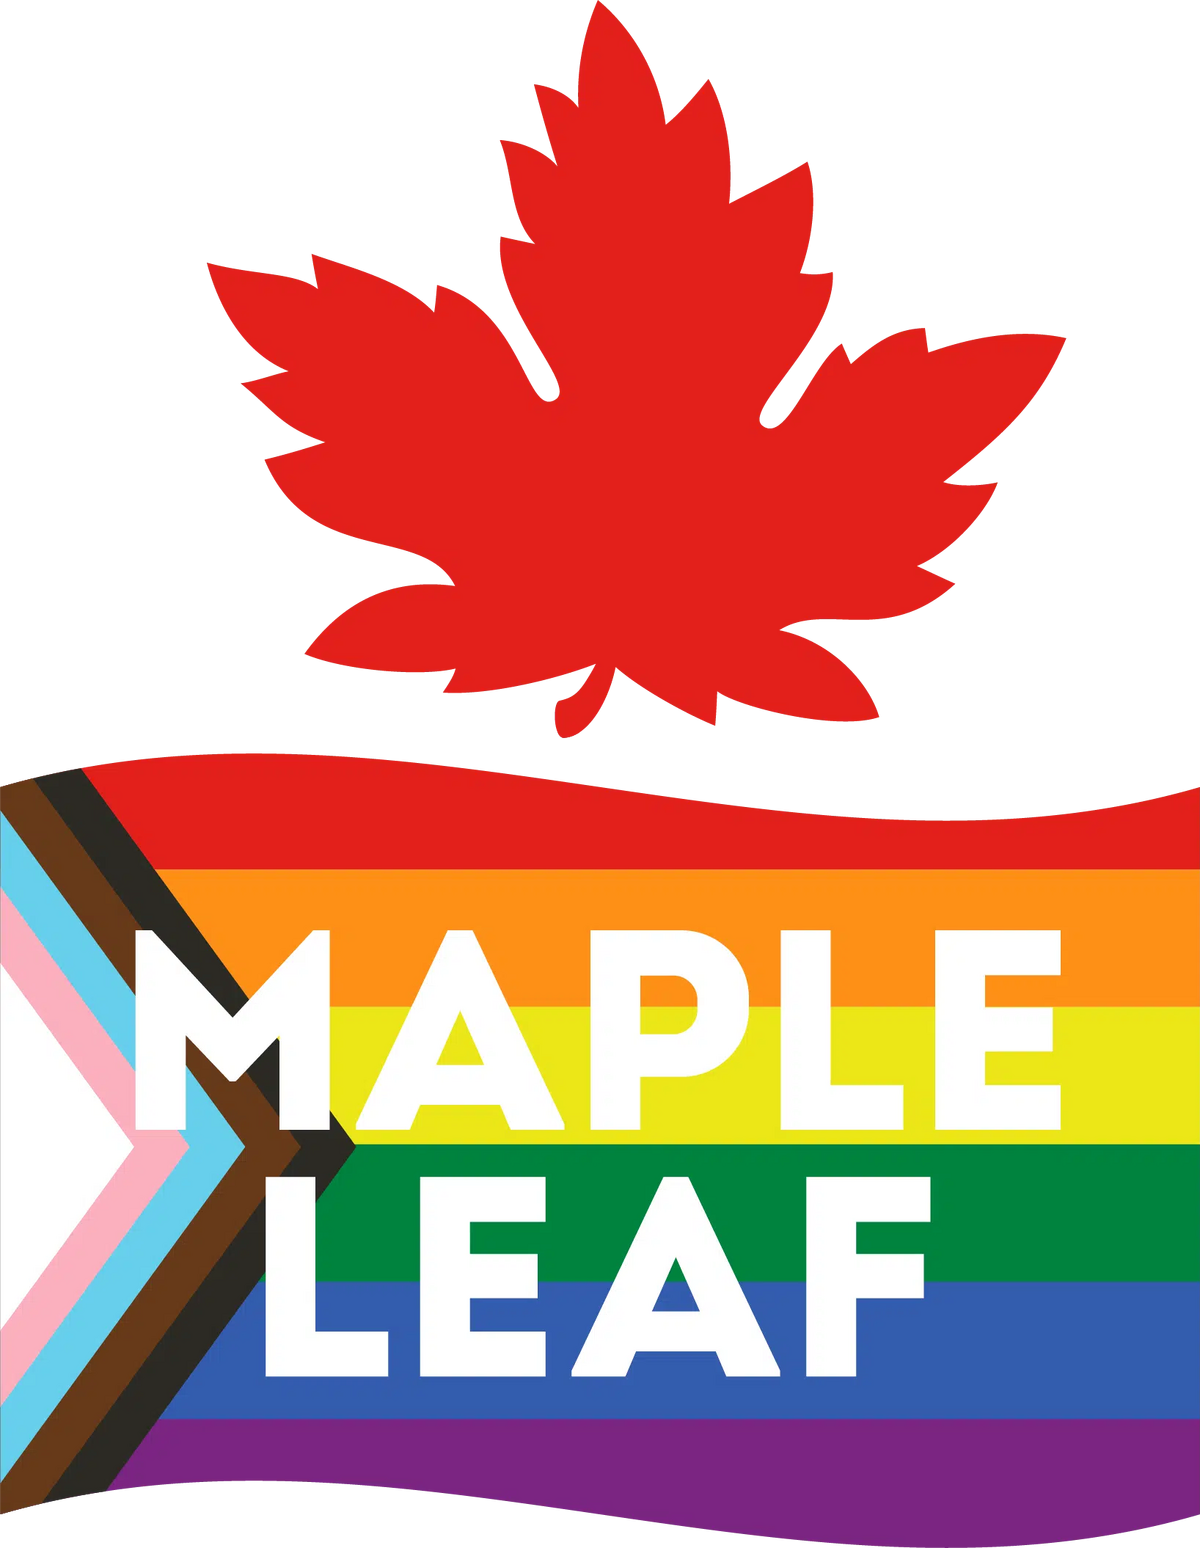 3d Maple Leaf Logo: Over 647 Royalty-Free Licensable Stock Illustrations &  Drawings | Shutterstock